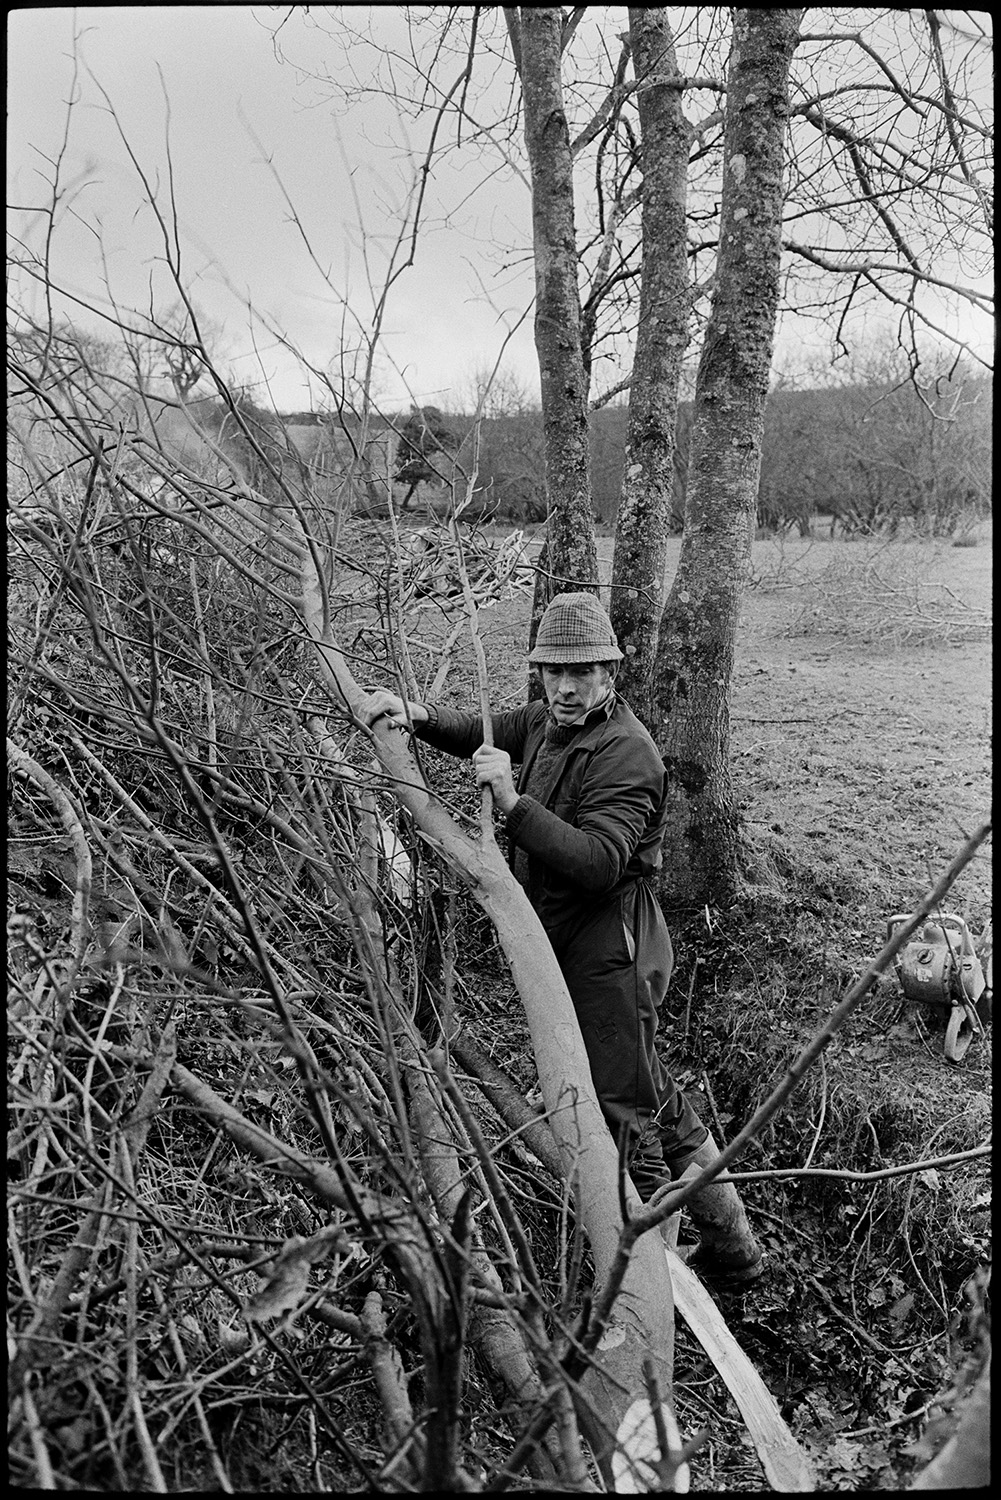 Man laying hedge.
[Gerald Harris laying a hedge at Millhams, Dolton. A chainsaw lies on the ground behind him and trees and woodpiles are visible in the background.]